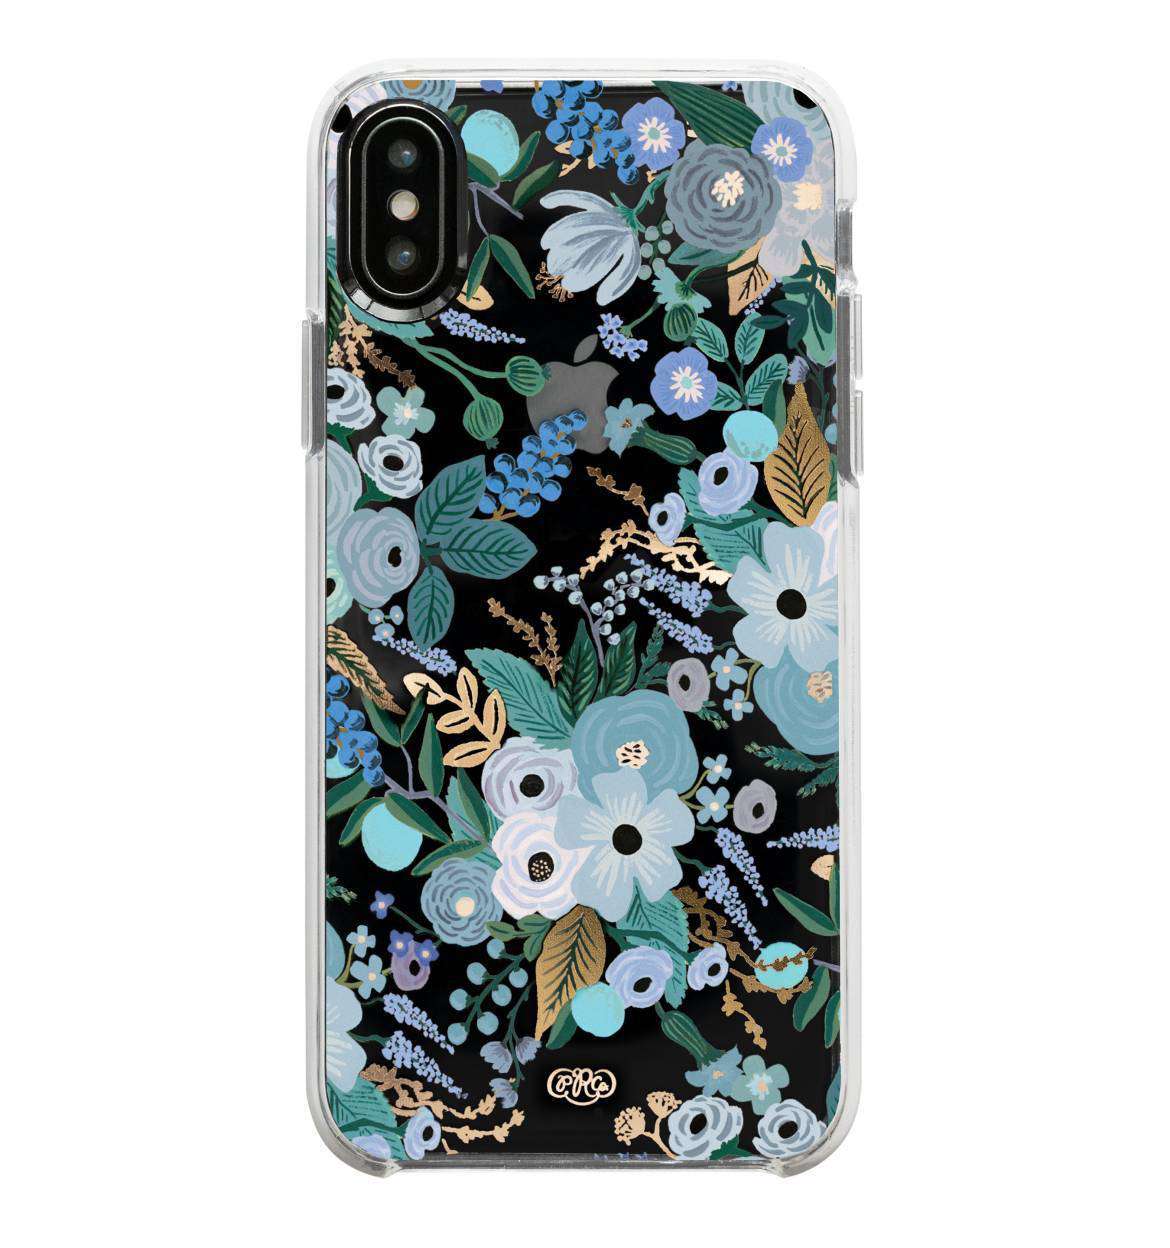 Modest Women's iPhone clear floral phone cover